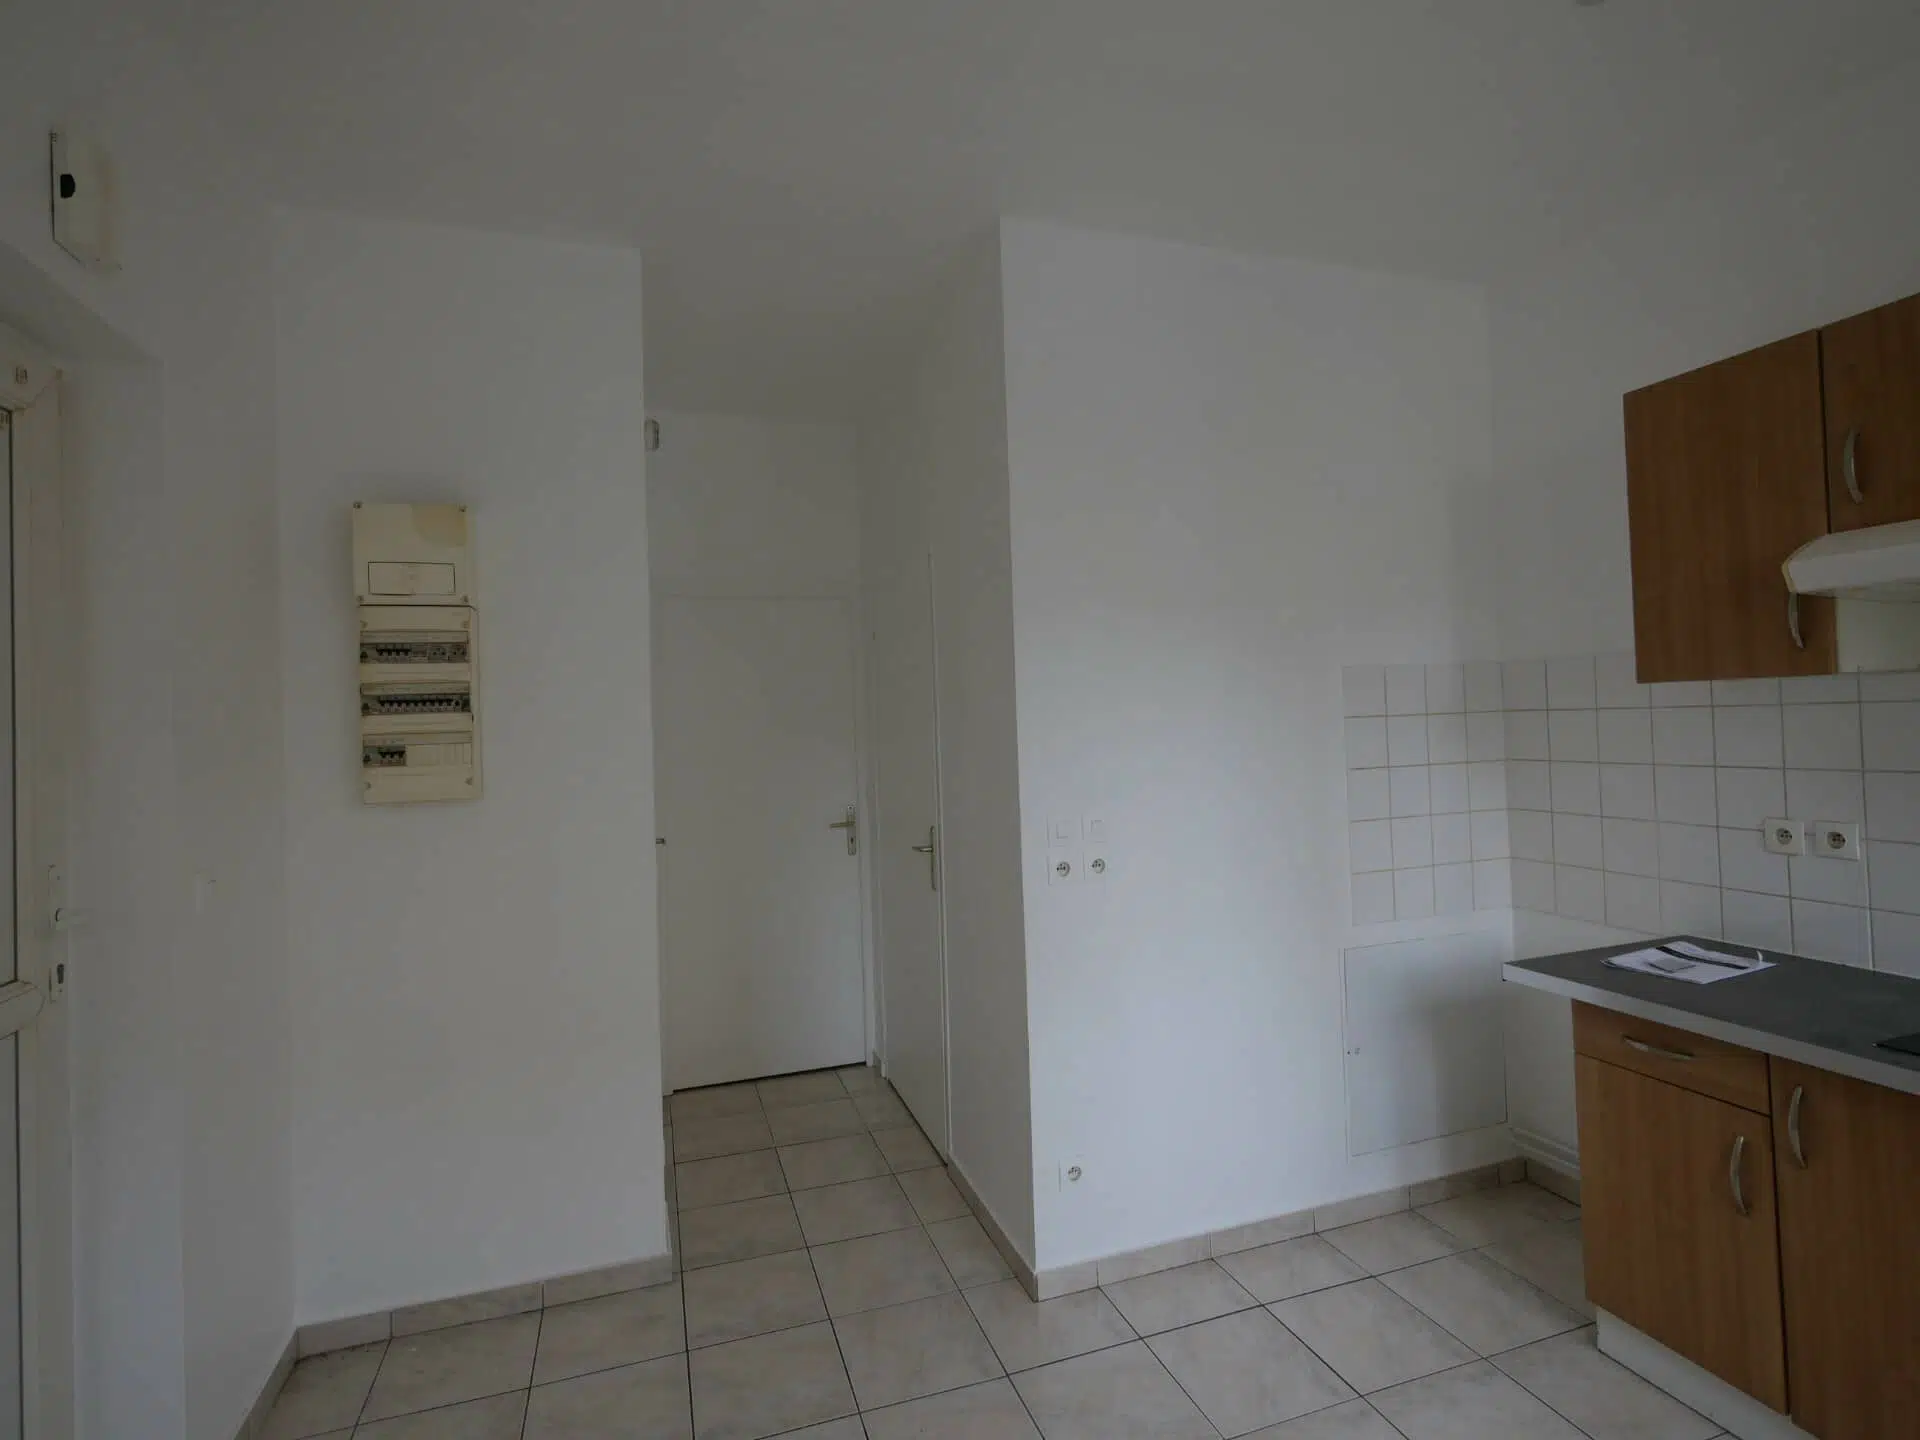 Location Appartement type F1 Le Havre 188